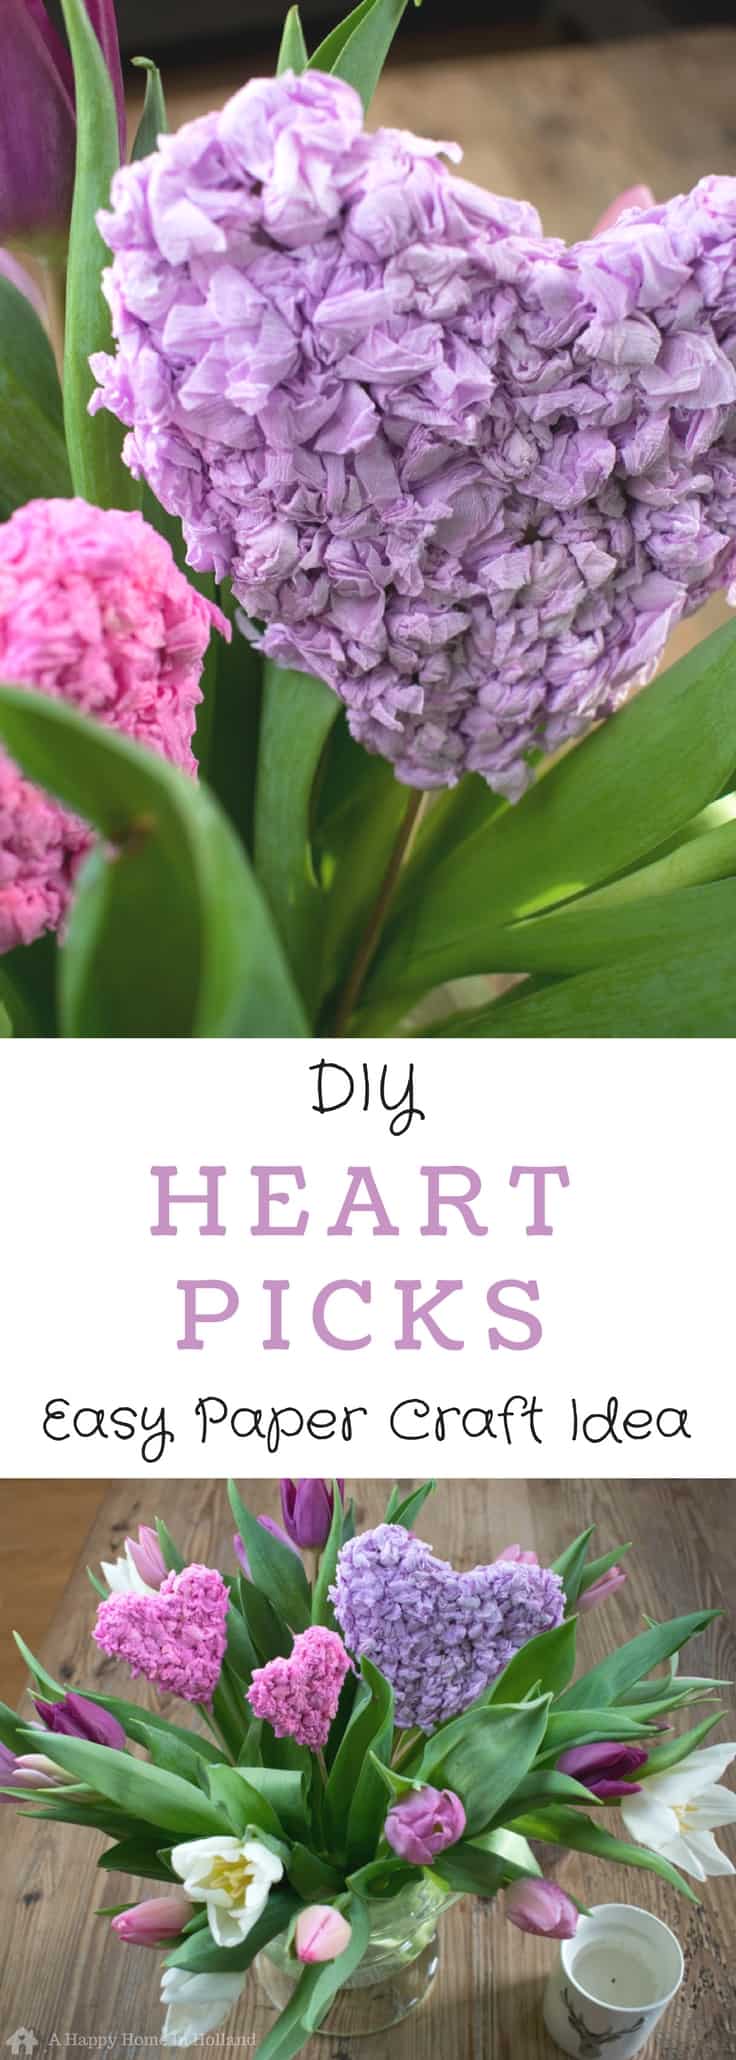 diy heart picks - a quick and easy paper craft idea to use to decorate your home and gifts - great for valentine's day and mother's day!